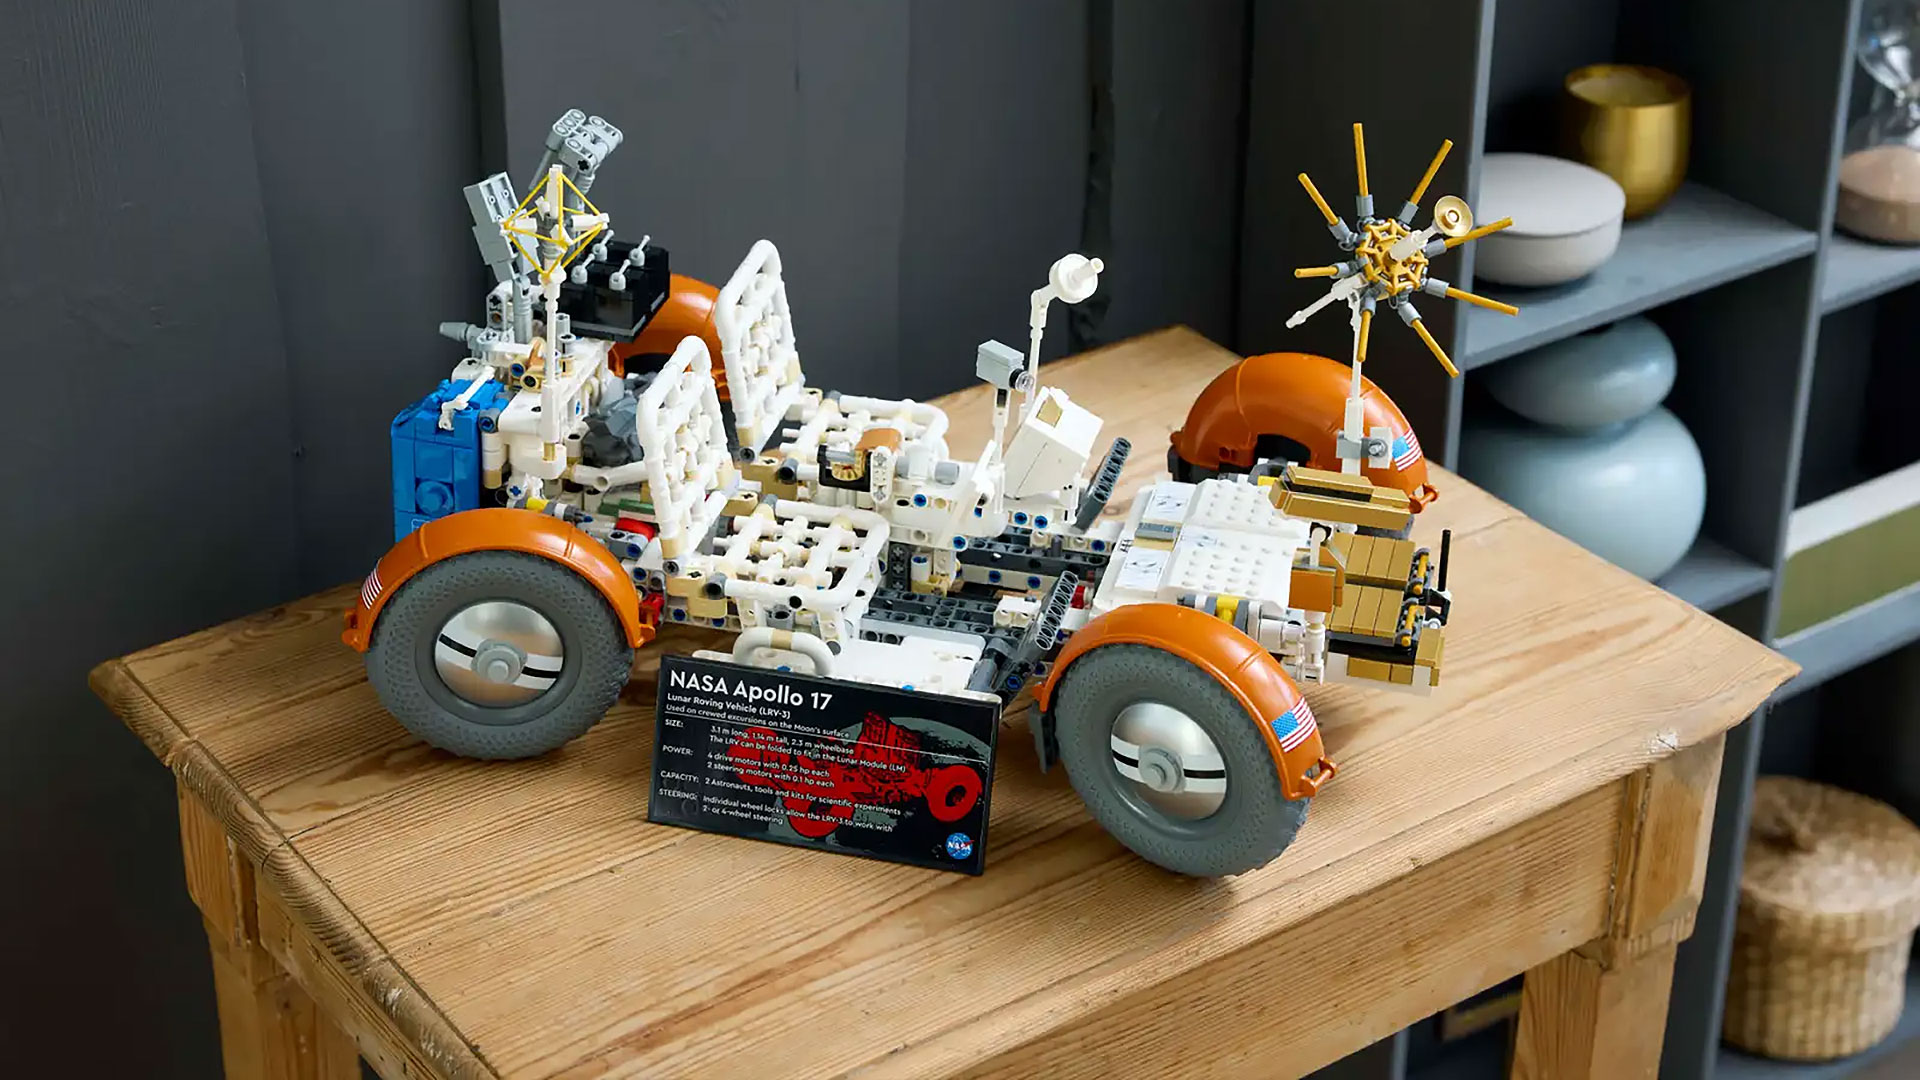 Lego rolls out details about Apollo lunar rover model coming in August